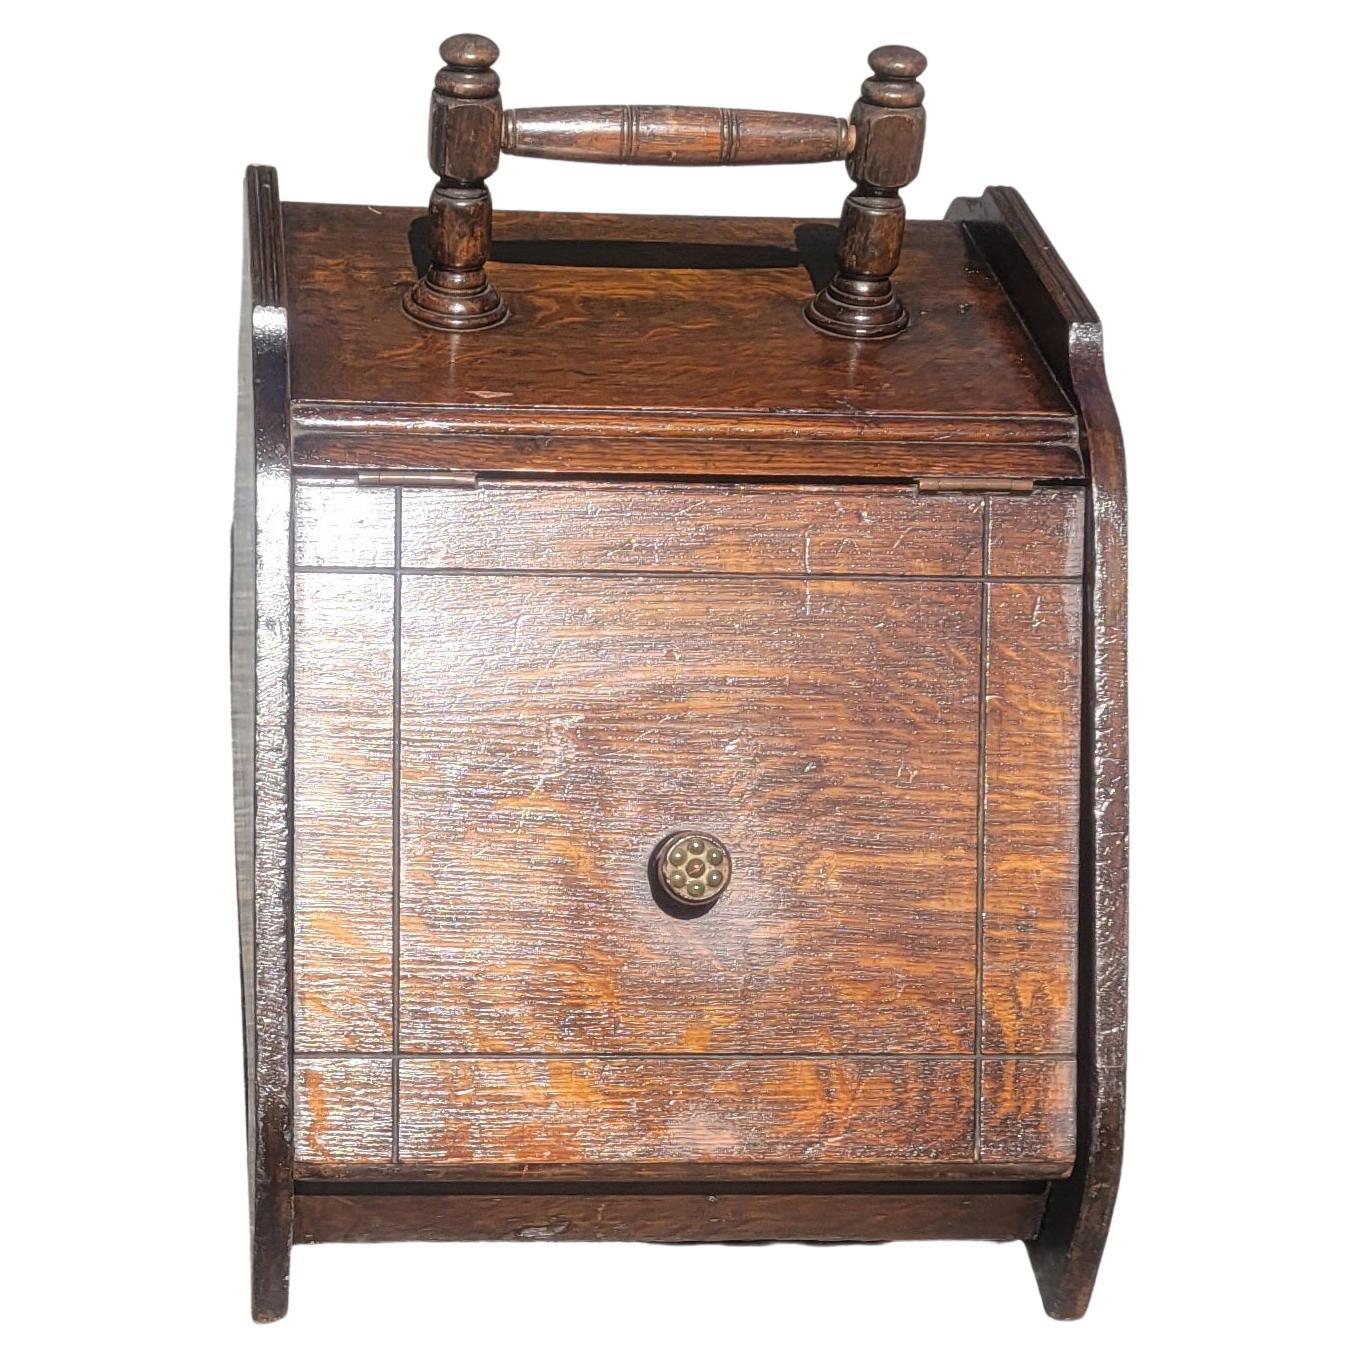 1890s antique coal scuttle box. Handcrafted oak wood. Metal line interior. Great addition to your fire place décor
Measures 13.5